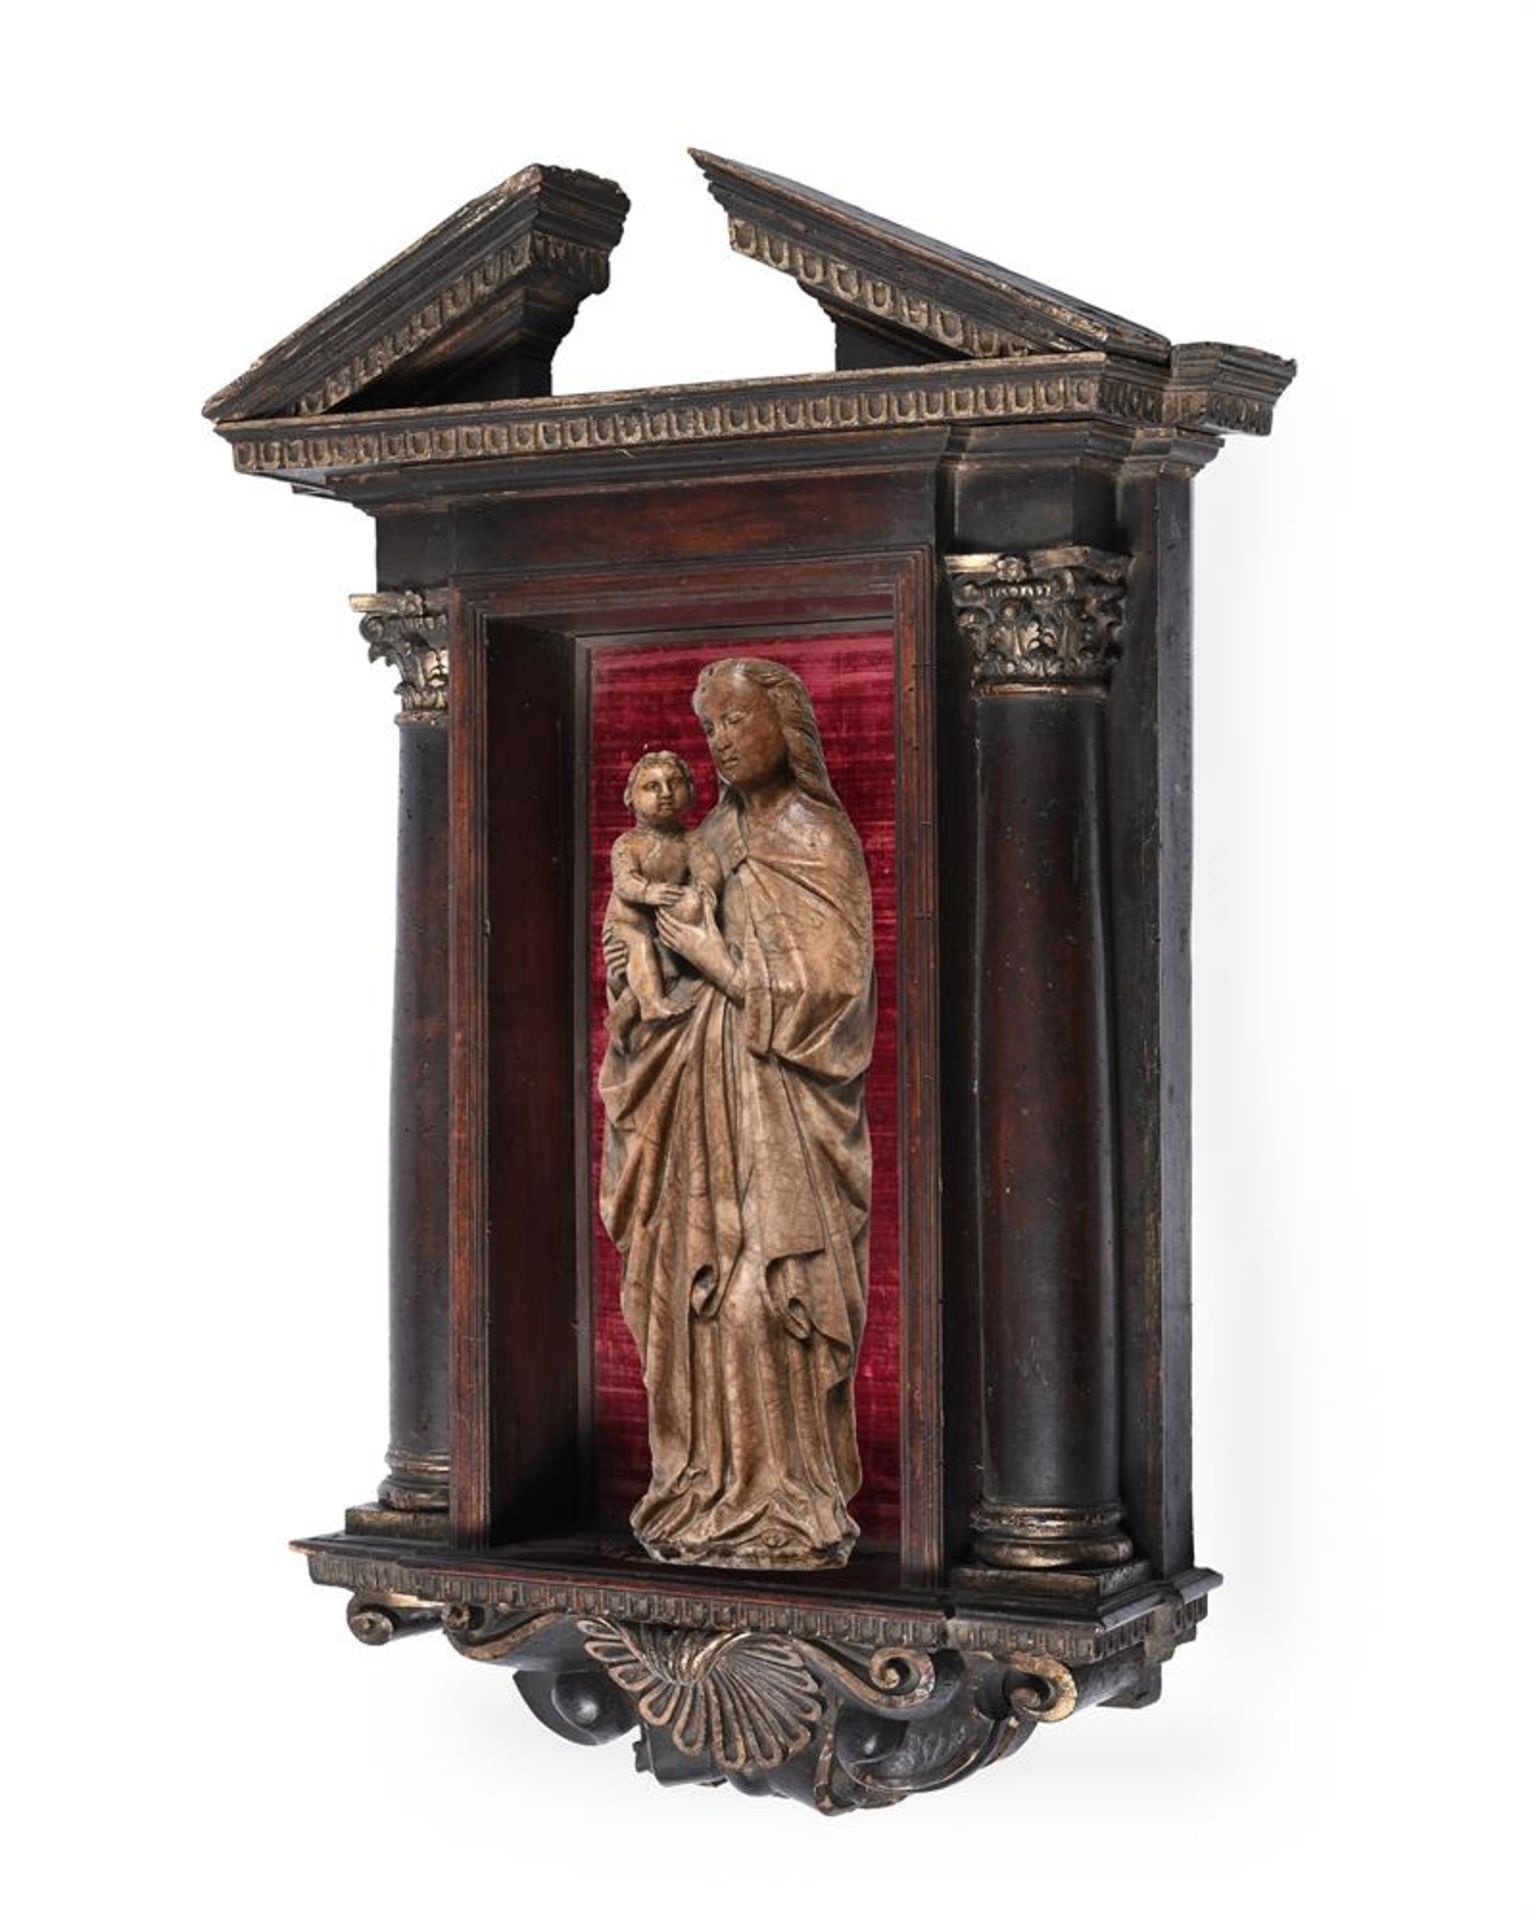 A GOTHIC CARVED ALABASTER FIGURE OF THE VIRGIN AND CHILD, 14TH CENTURY - Image 8 of 9